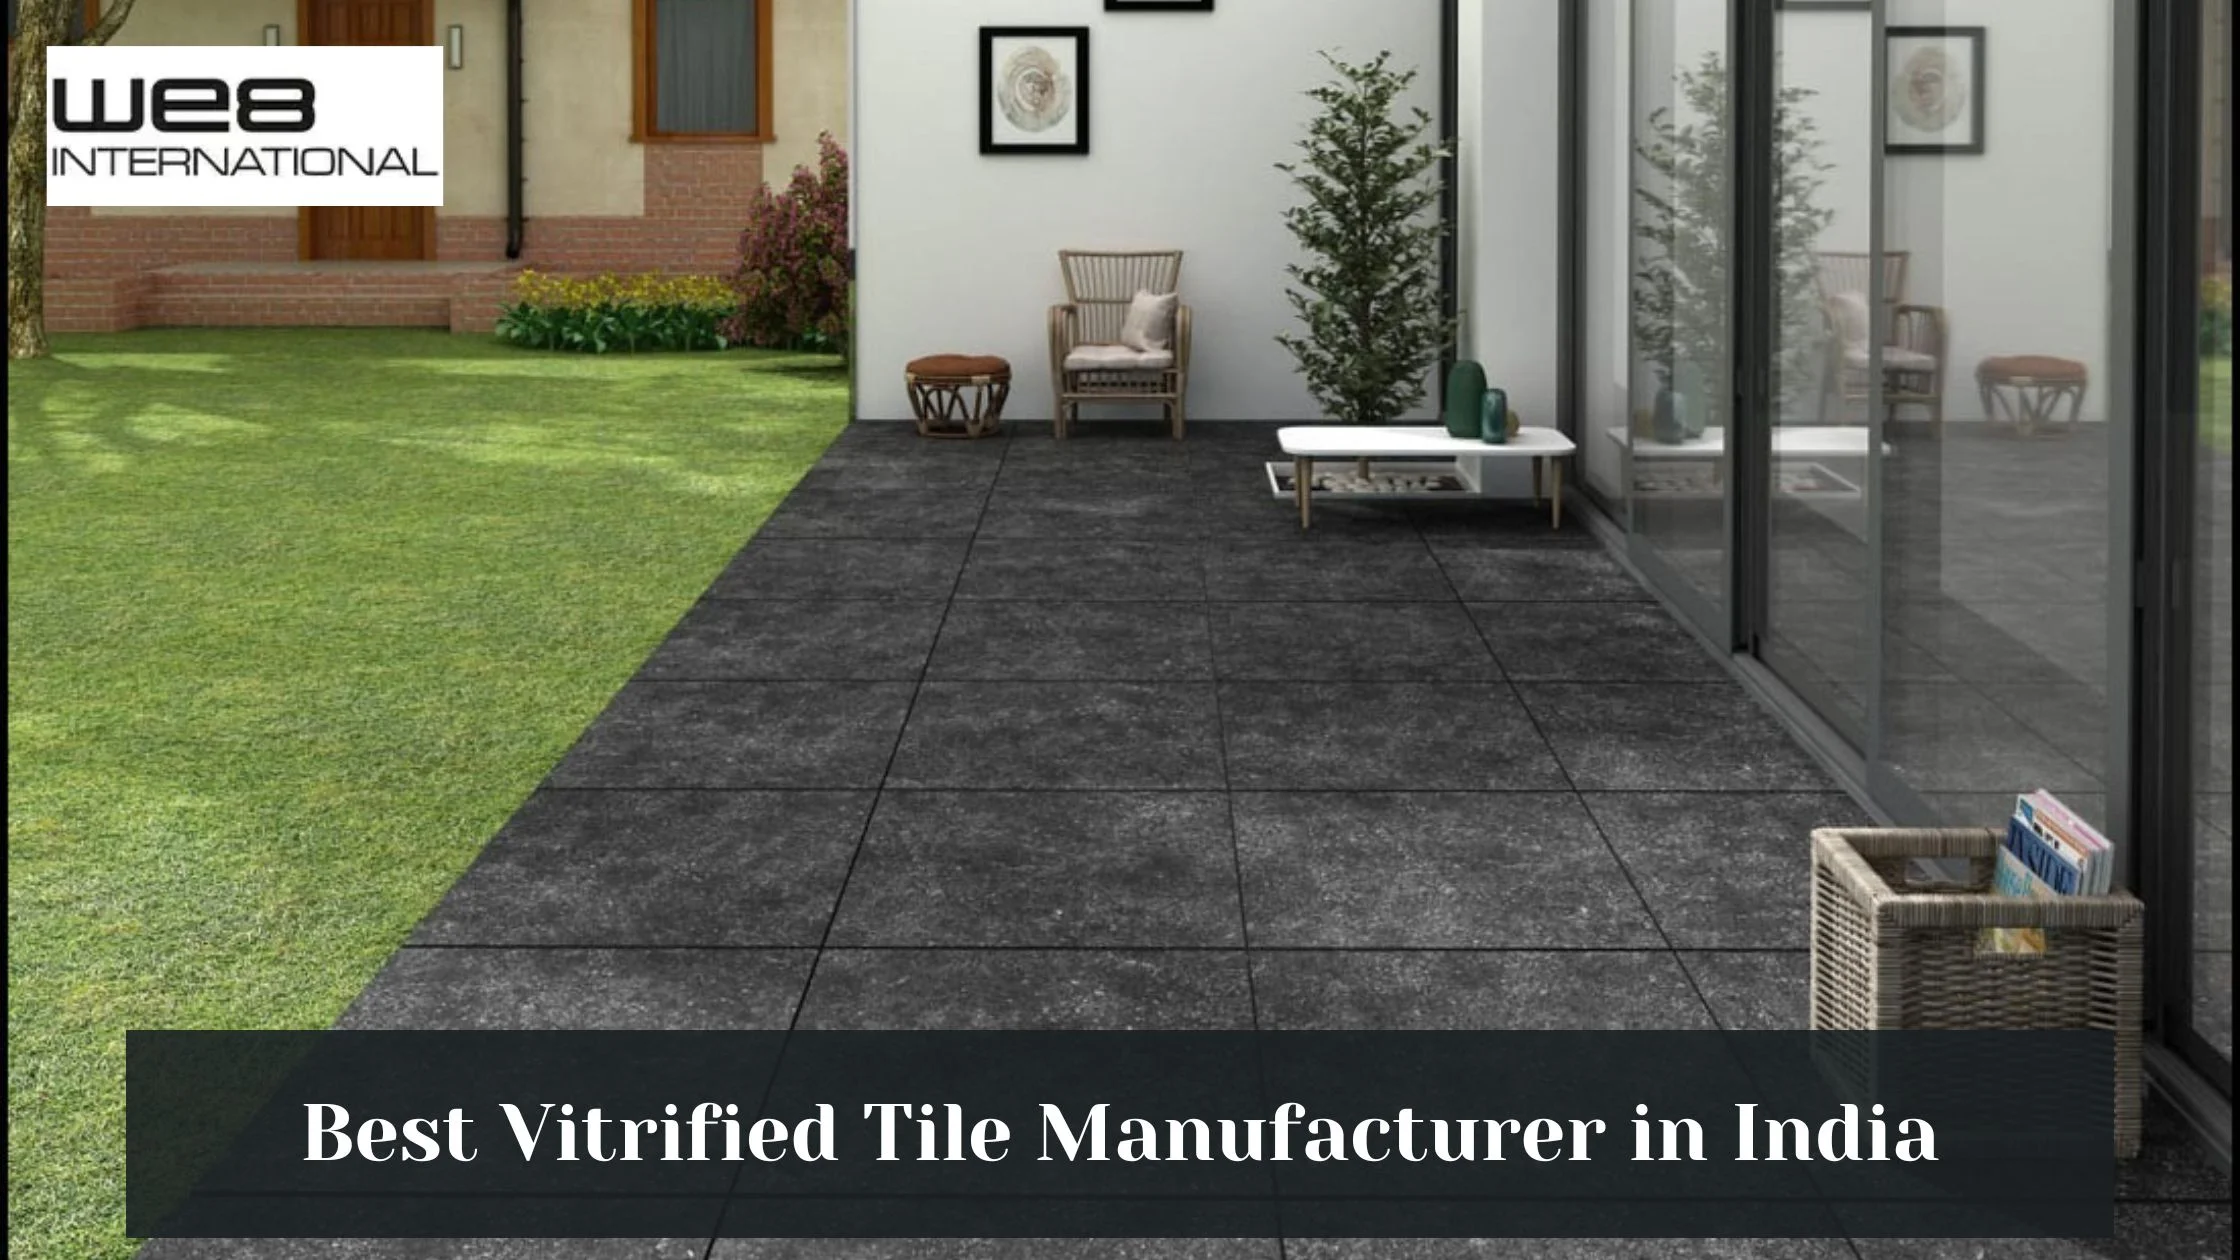 Best Vitrified Tile Manufacturer in India